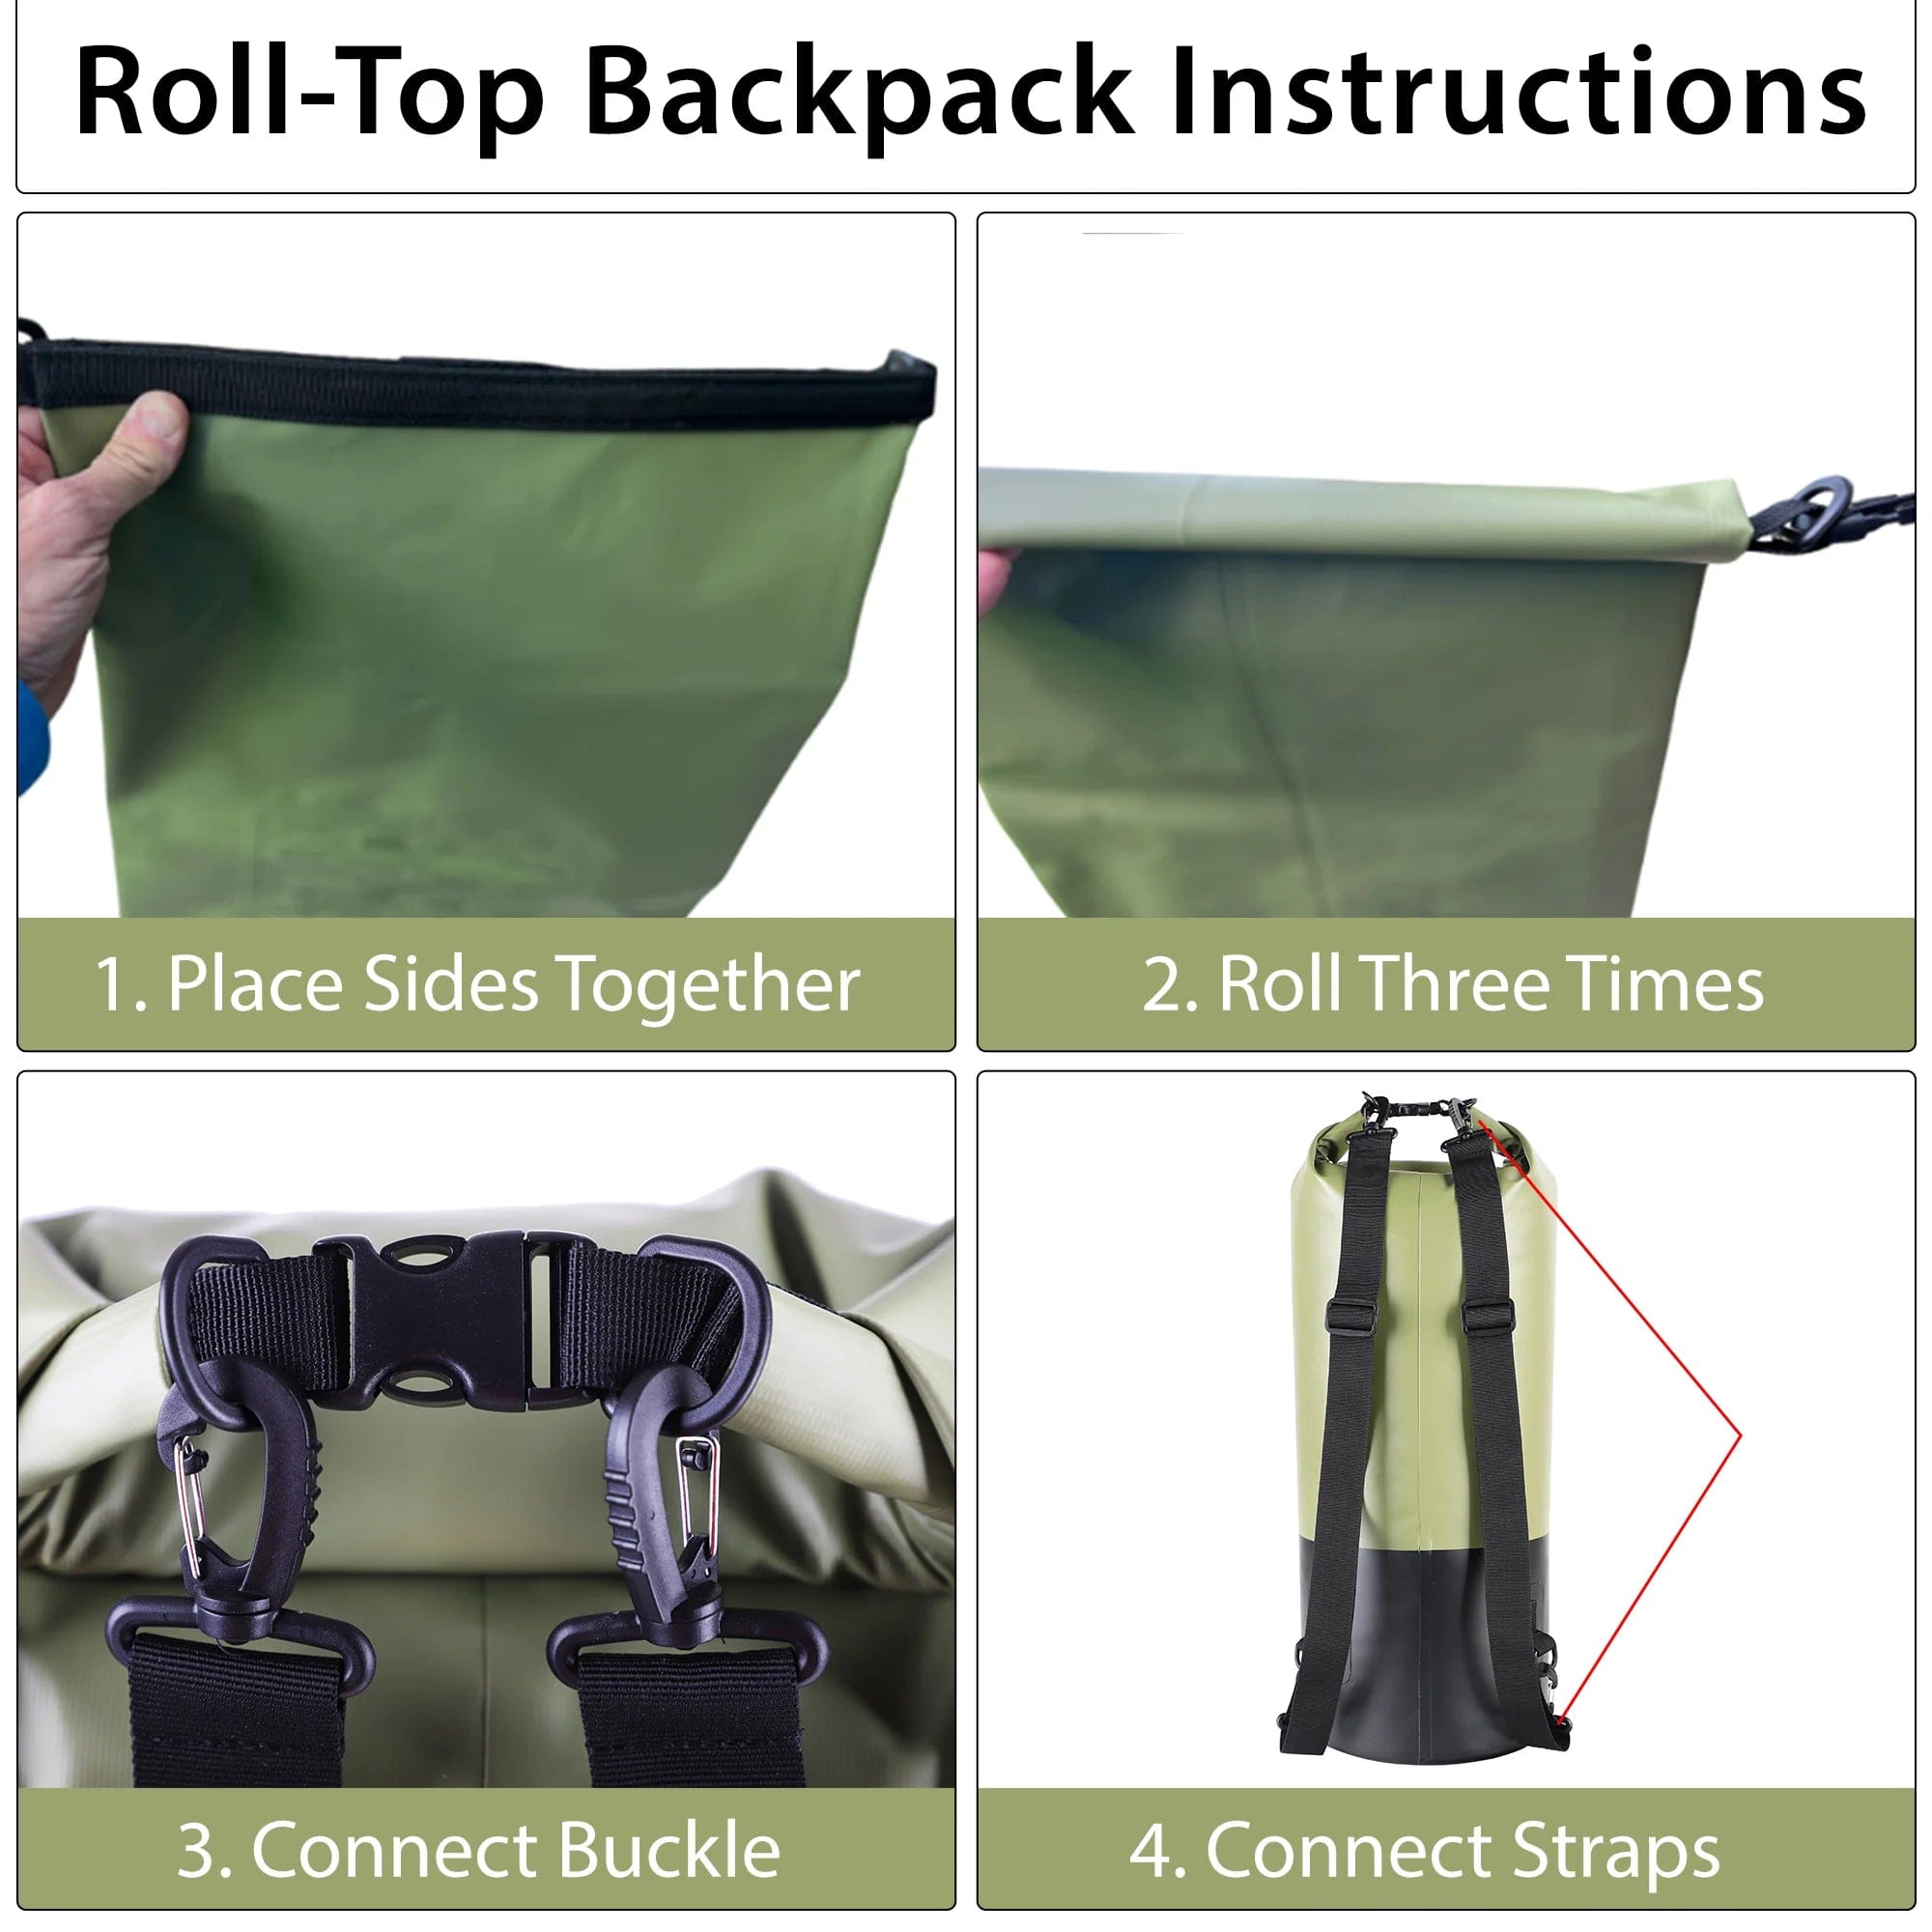 Malo'o 30L Waterproof Roll-Top Backpack - Ideal for Mauritius